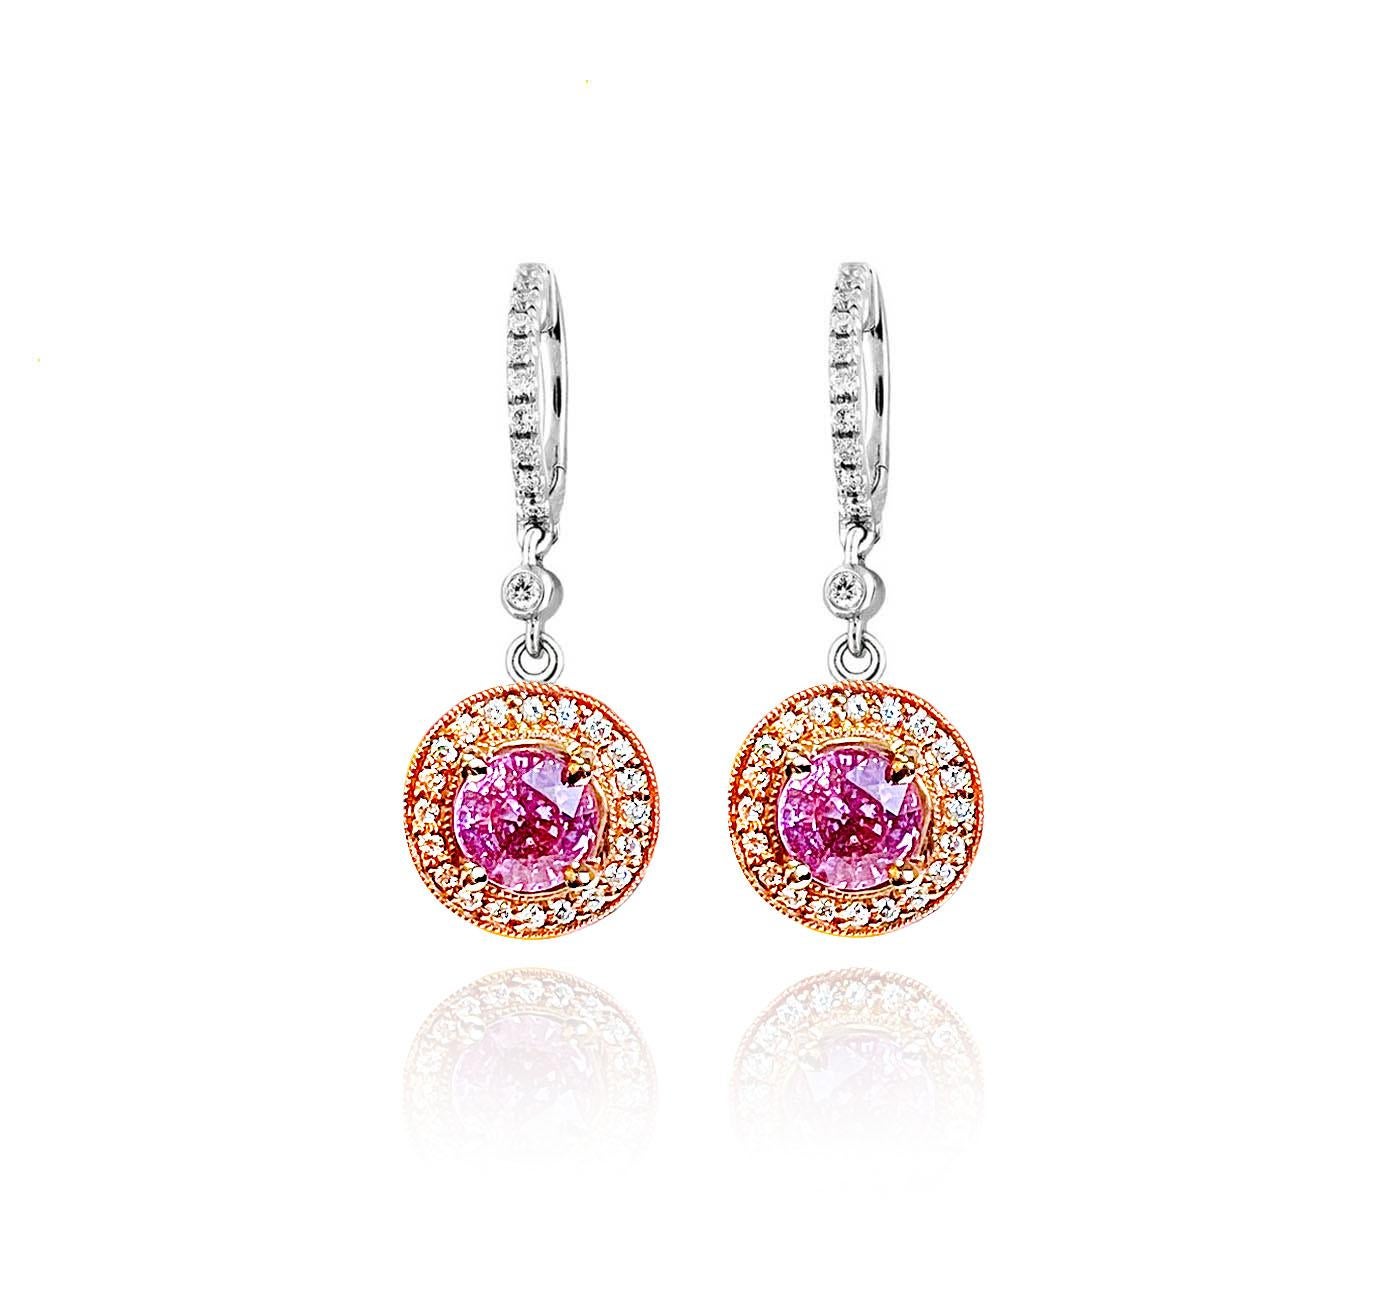 Produced by award winning Italian designer Stefano Vitolo. Stefano creates custom artisanal one of a kind jewelry with excellent gemstones in a truly old world Italian craftmanship.

Gemstones: 2.0 carat Pink Sapphire, 0.69 carat Diamonds
